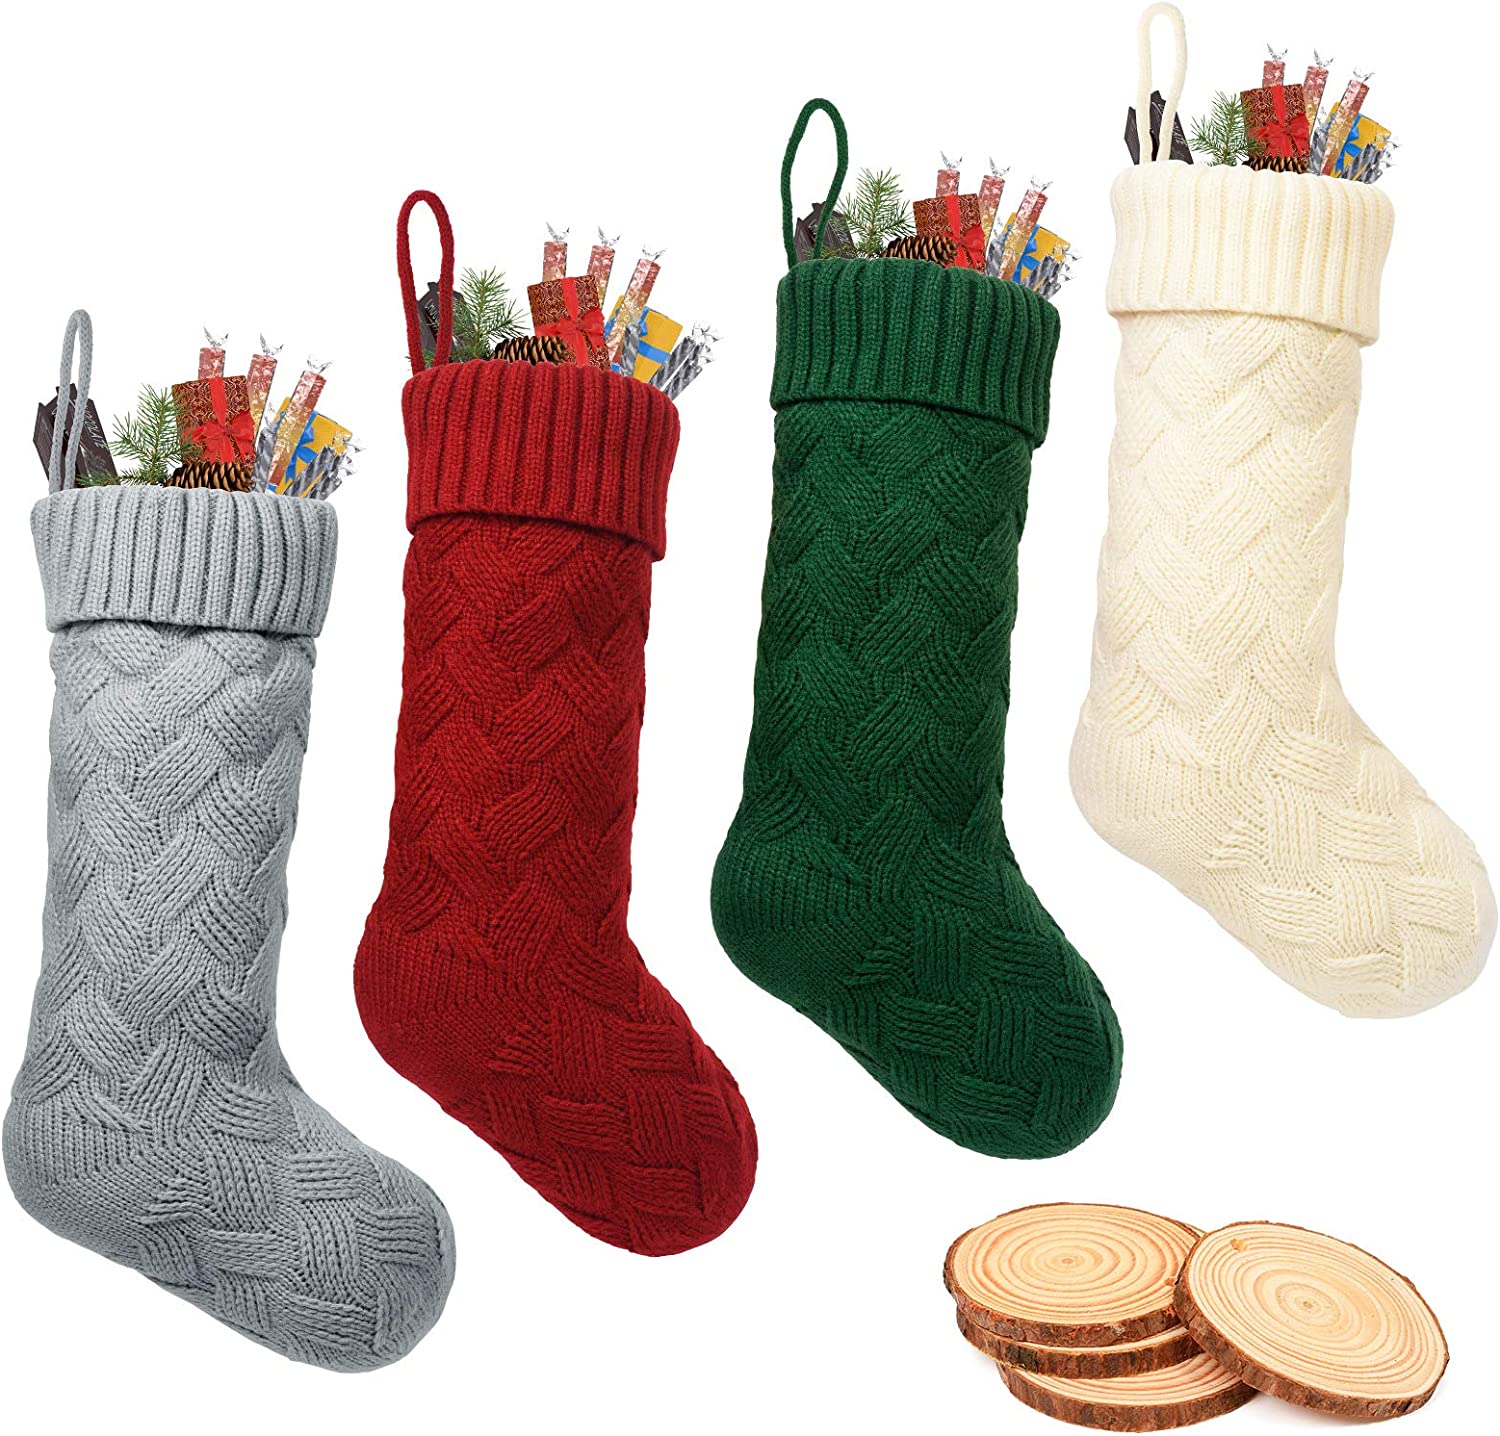 ROSFORU Knit Christmas Stockings, 4 Pack Large Size Candy Gift Bag Personalized Decoration Weave Xmas Socks, Classic Style?Ivory White, Green, Gray, Burgundy?